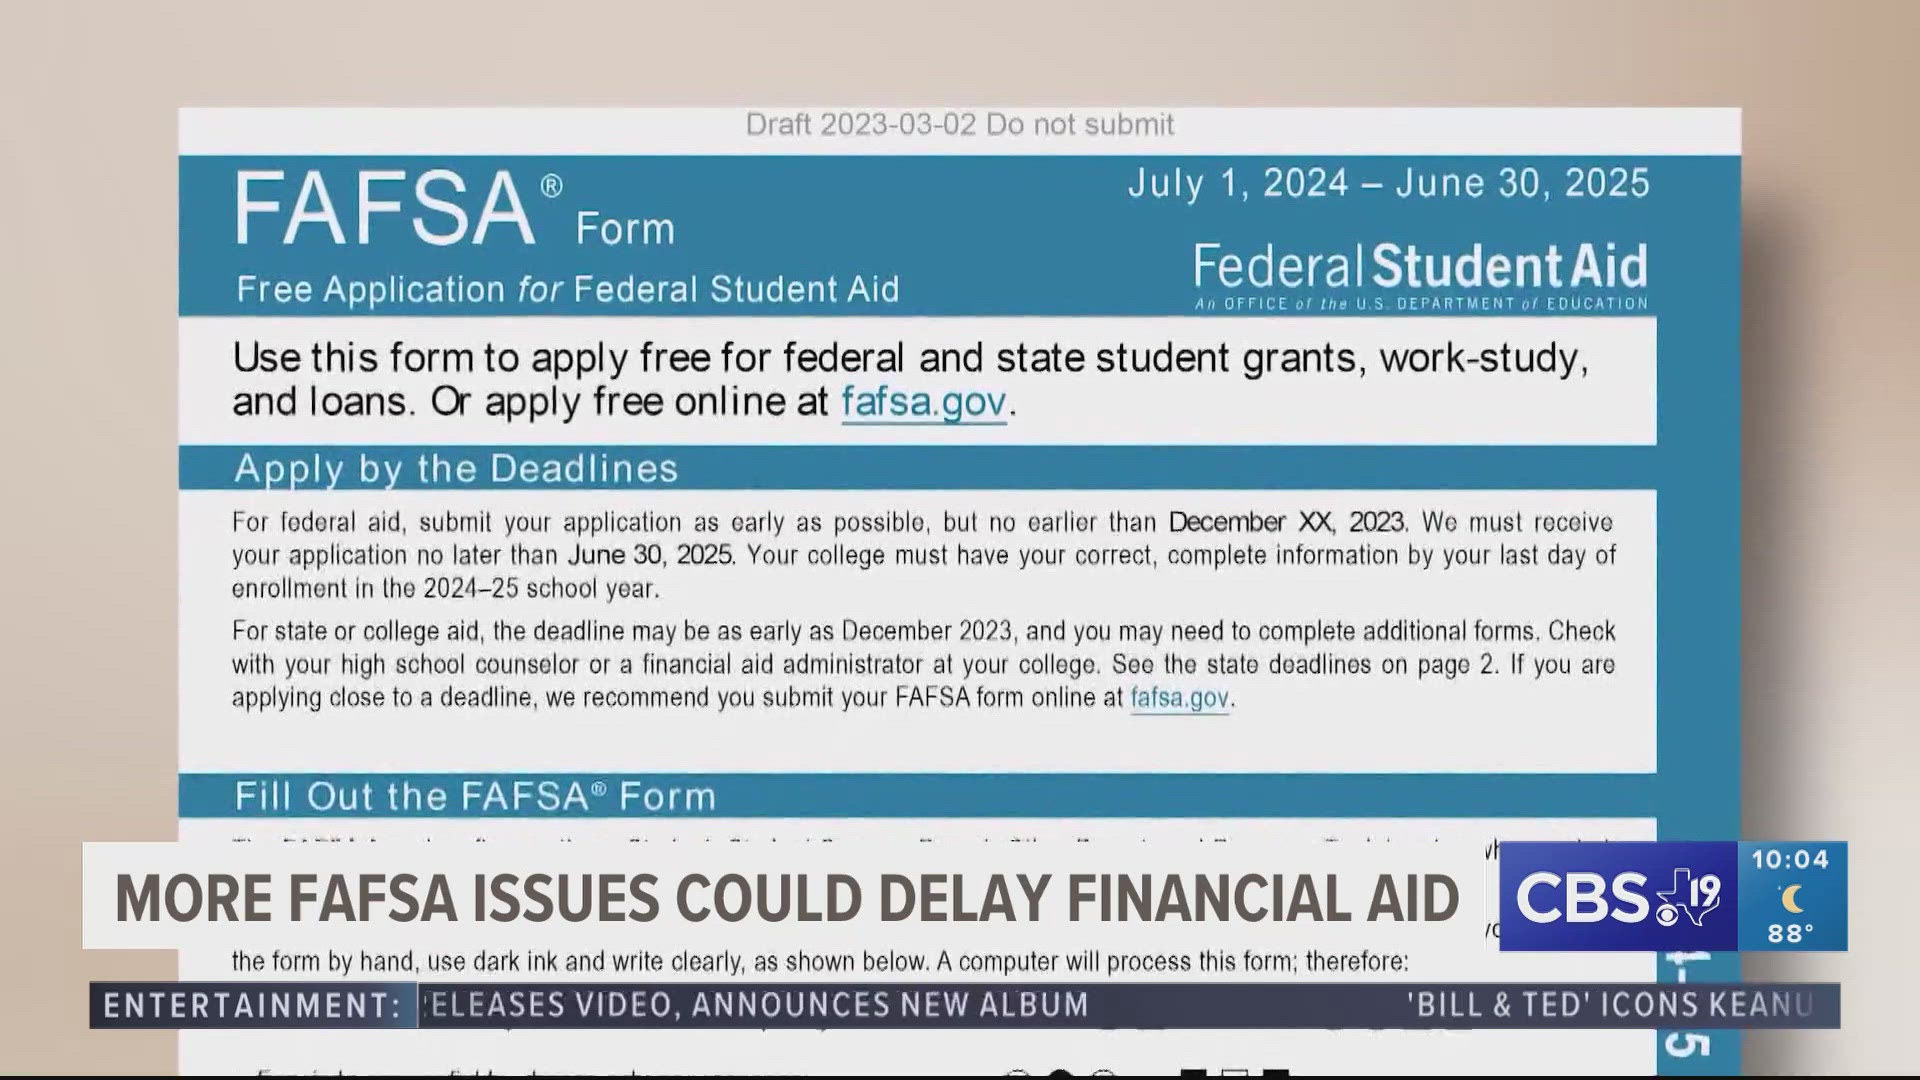 This week, the U.S Department of Education announced that colleges and universities will not be able to make corrections to financial aid forms in bulk.